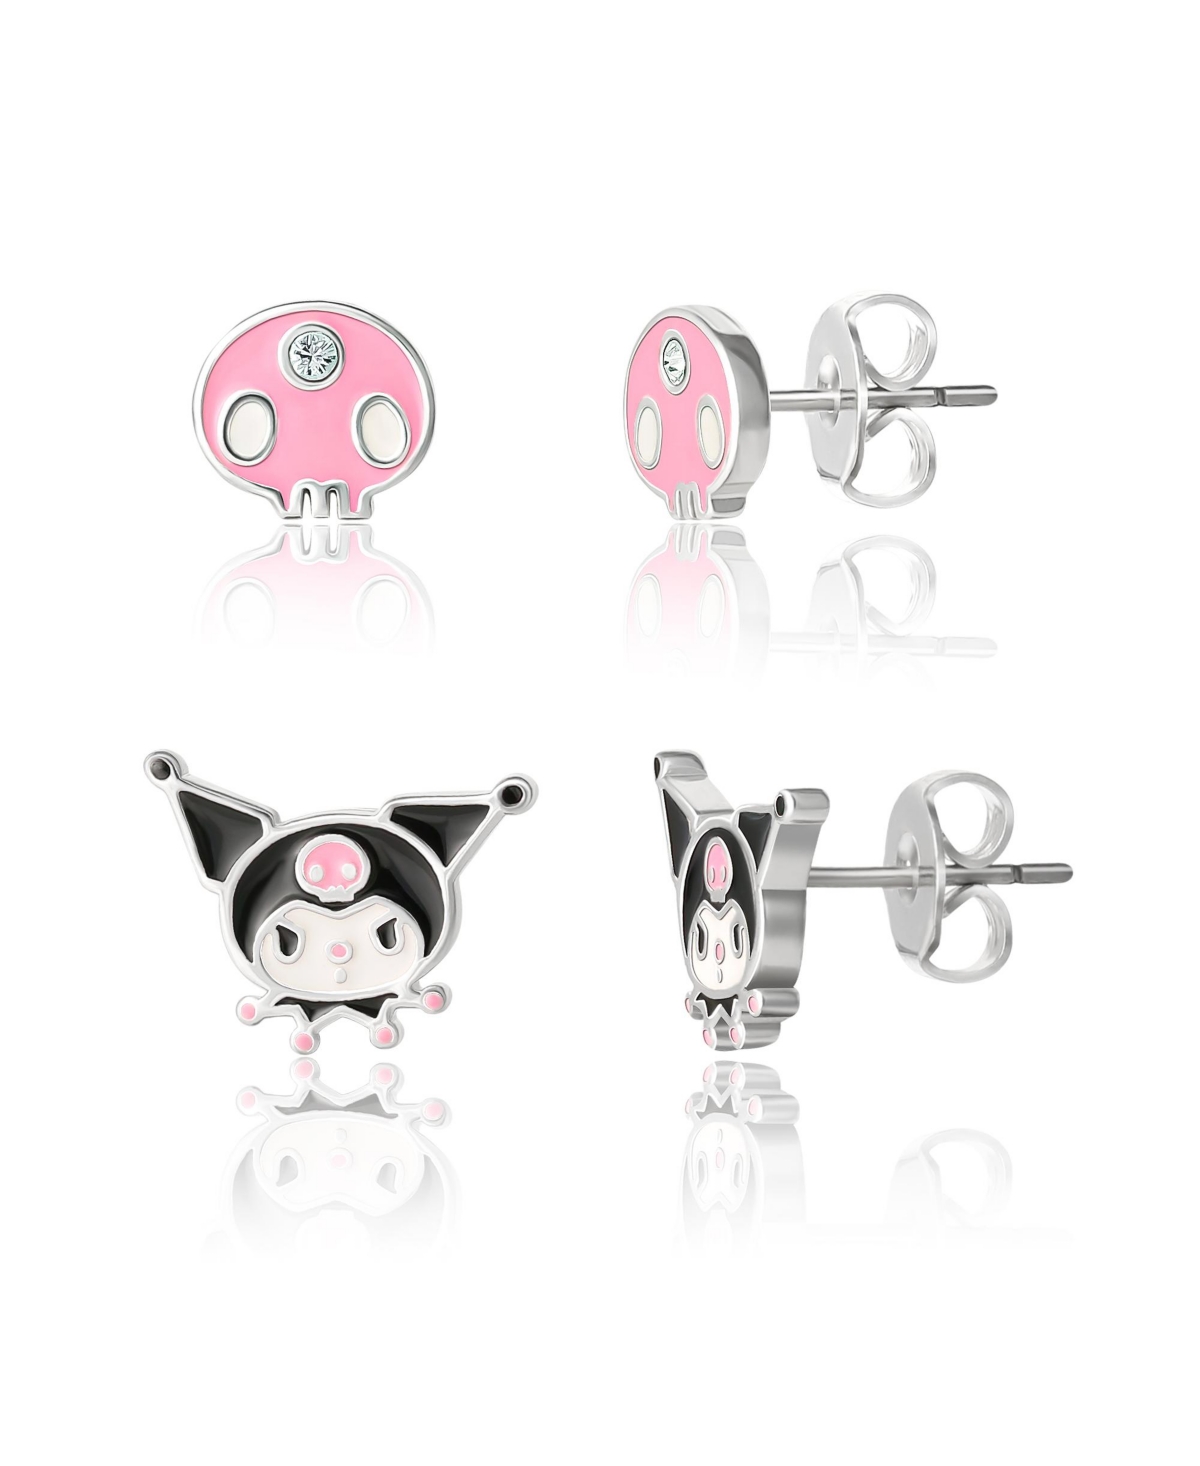 Sanrio Pink Skull and Kuromi Silver Plated Earring Set - 2 Pairs, Officially Licensed - Pink, black